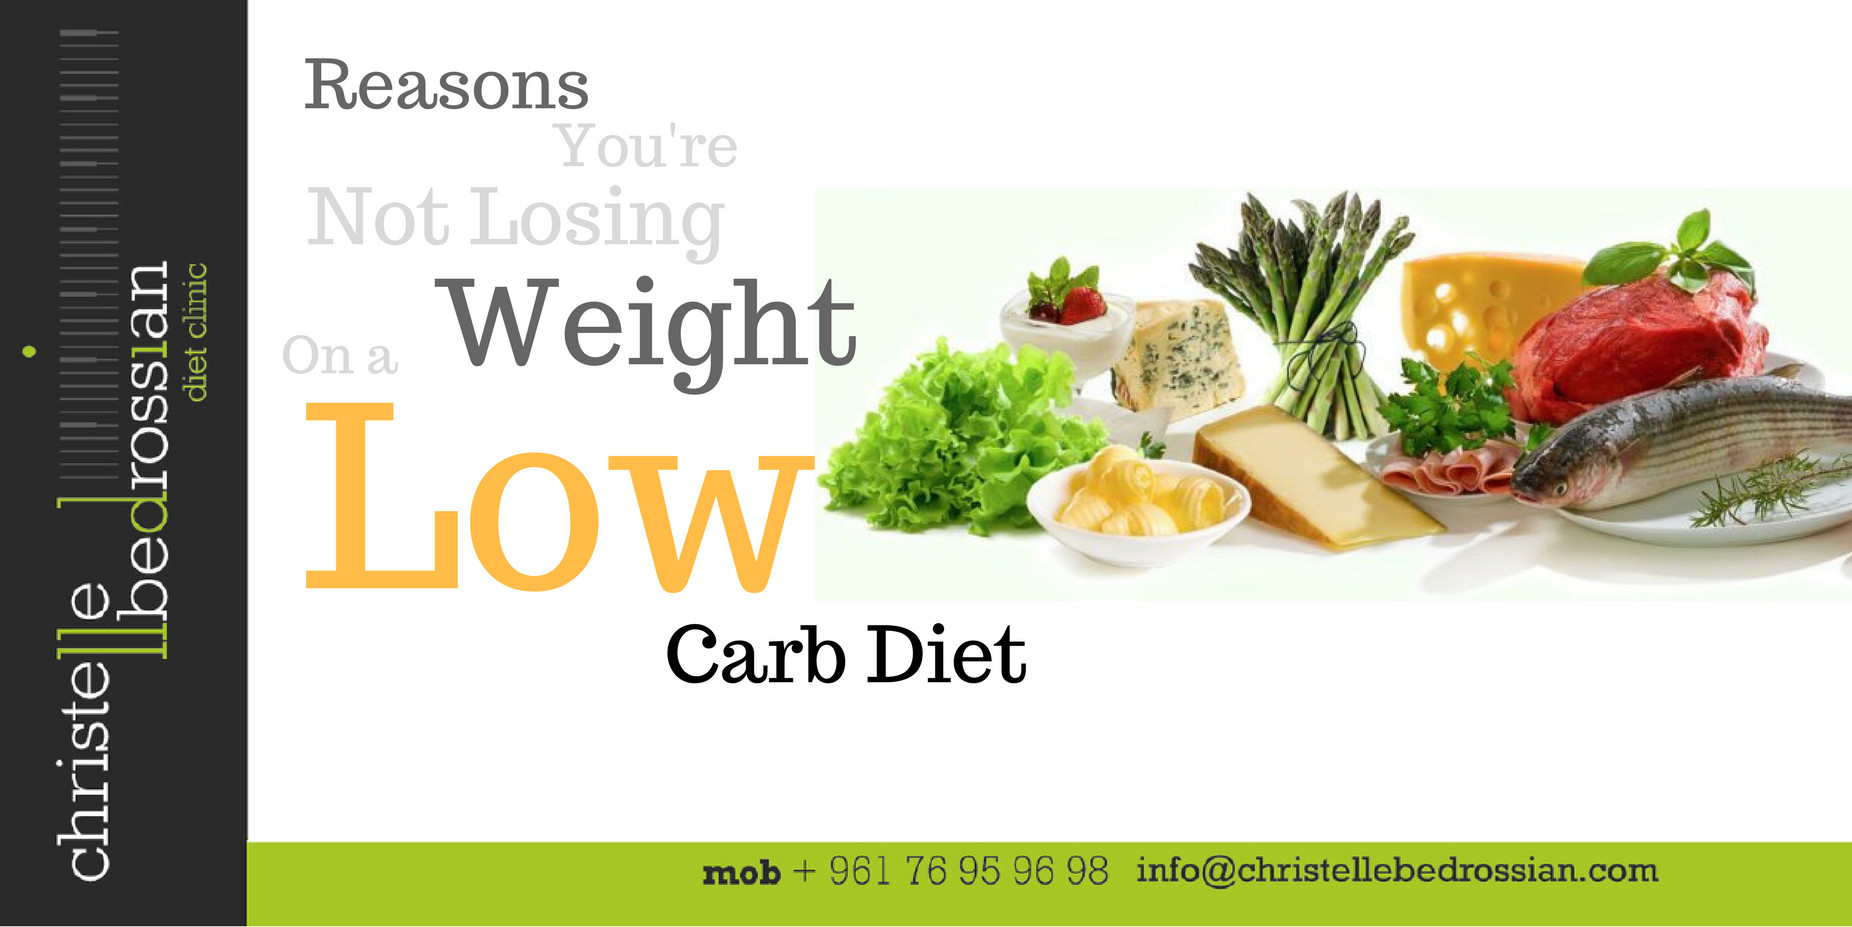 Low Carbohydrate Diet Losing Weight
 Reasons You’re Not Losing Weight a Low Carb Diet